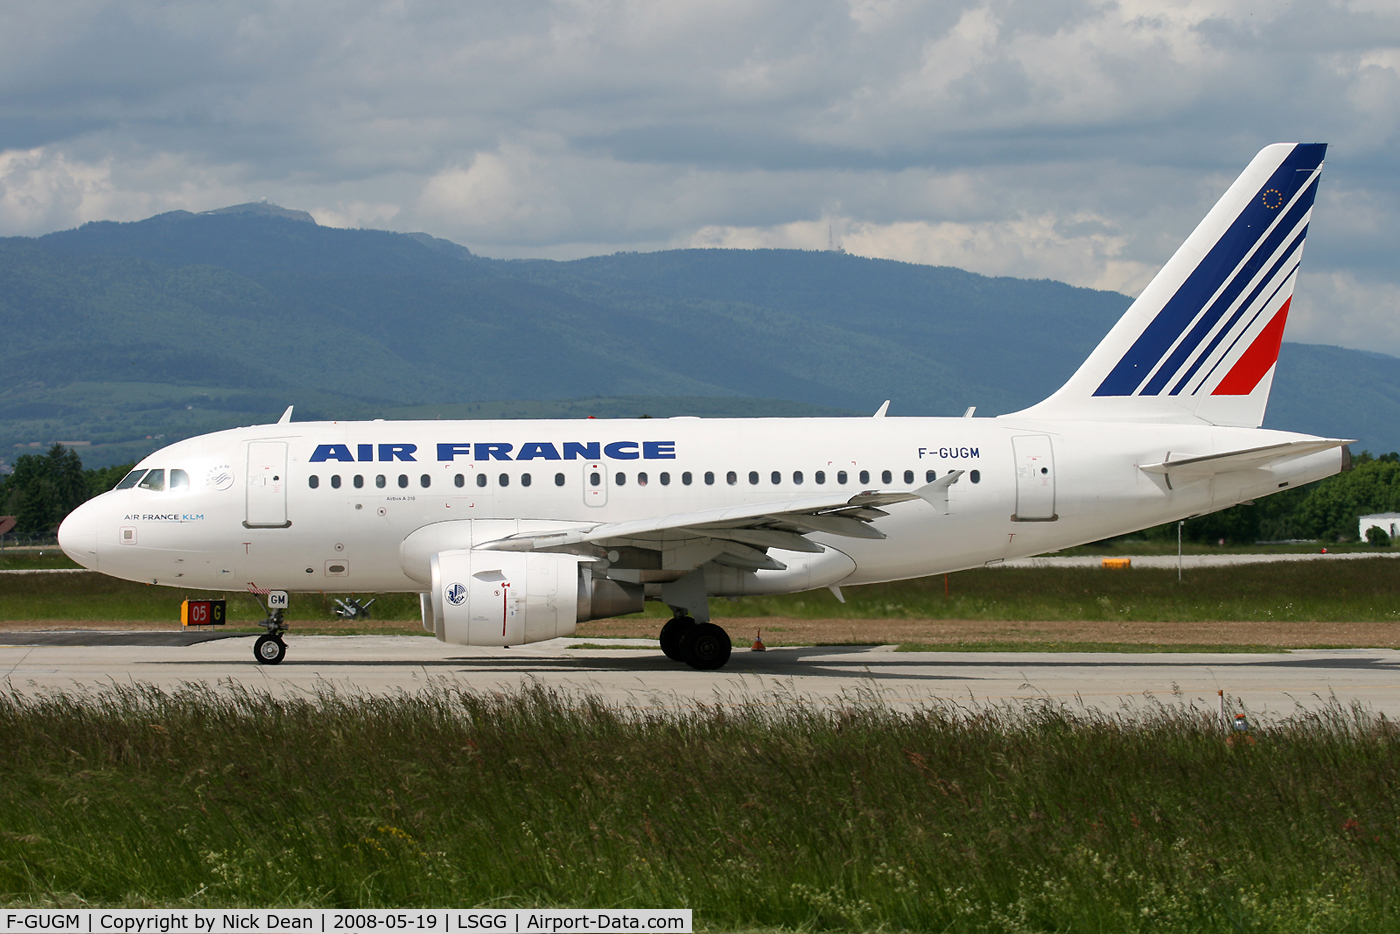 F-GUGM, 2006 Airbus A318-111 C/N 2750, /